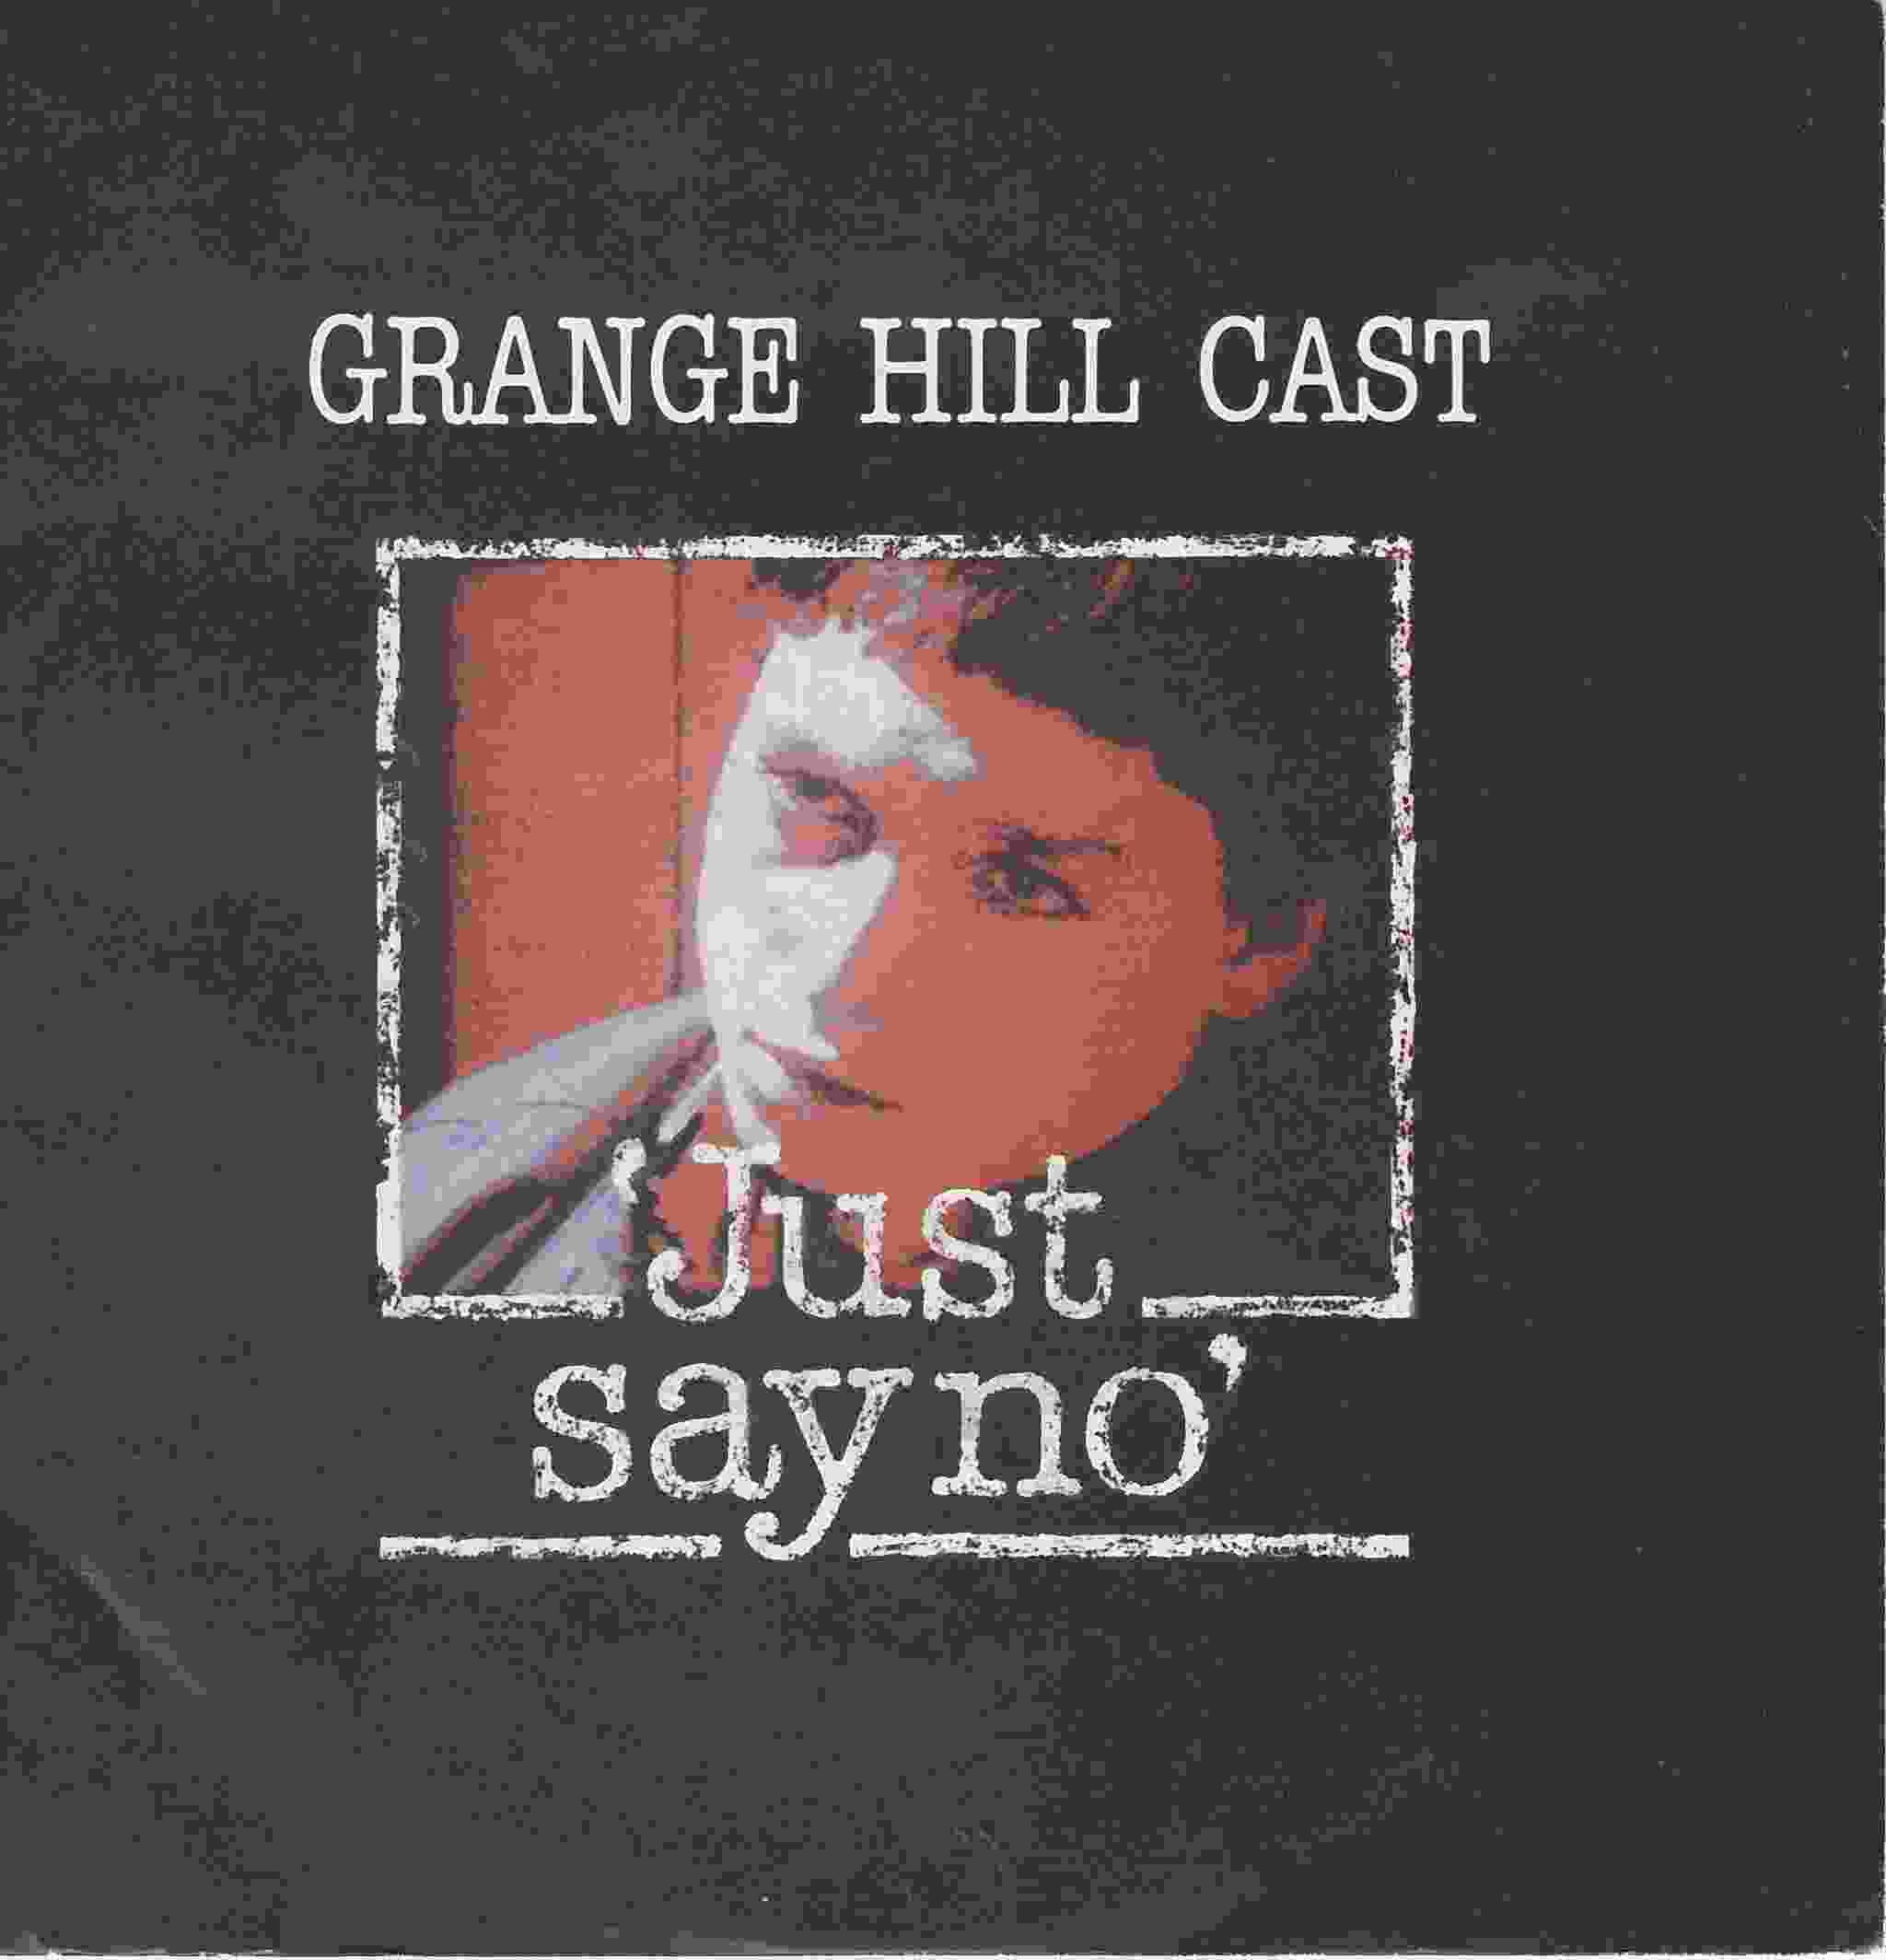 Picture of Just say no (Grange Hill) by artist Grange Hill cast from the BBC singles - Records and Tapes library